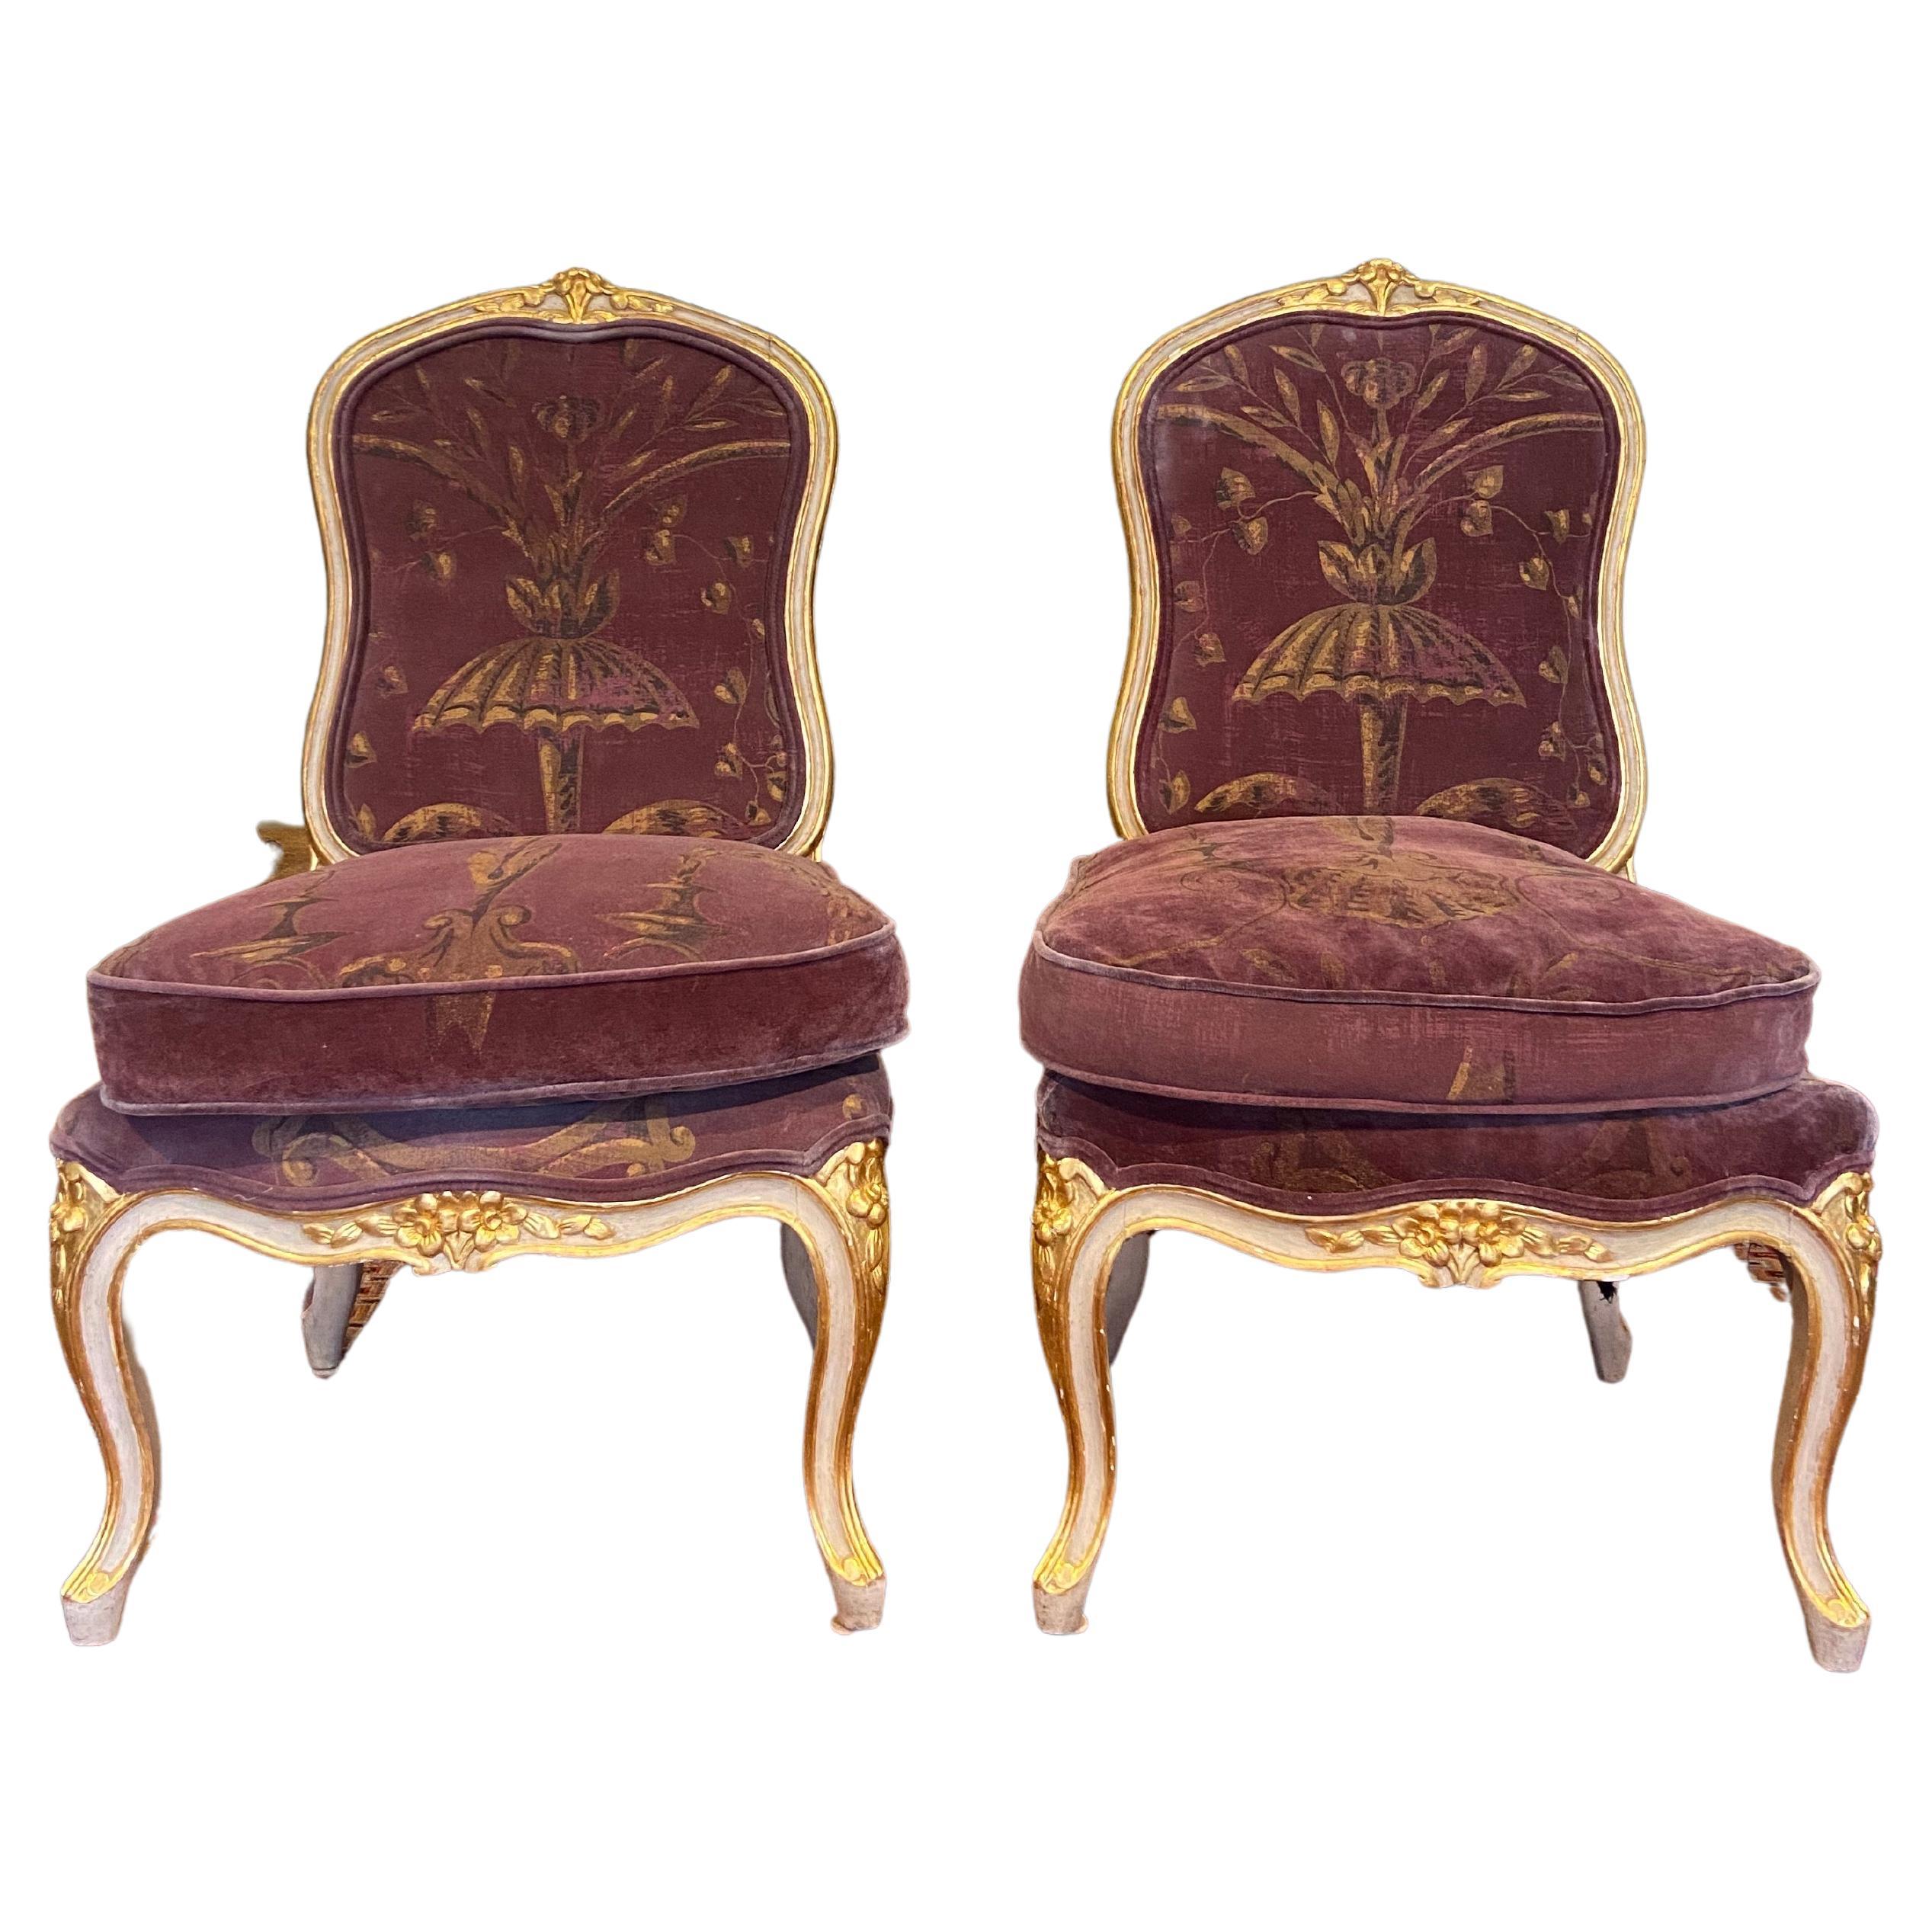 A Pair of Louis XV Painted and Gilded Salon Chairs 'Mid 18th Century'